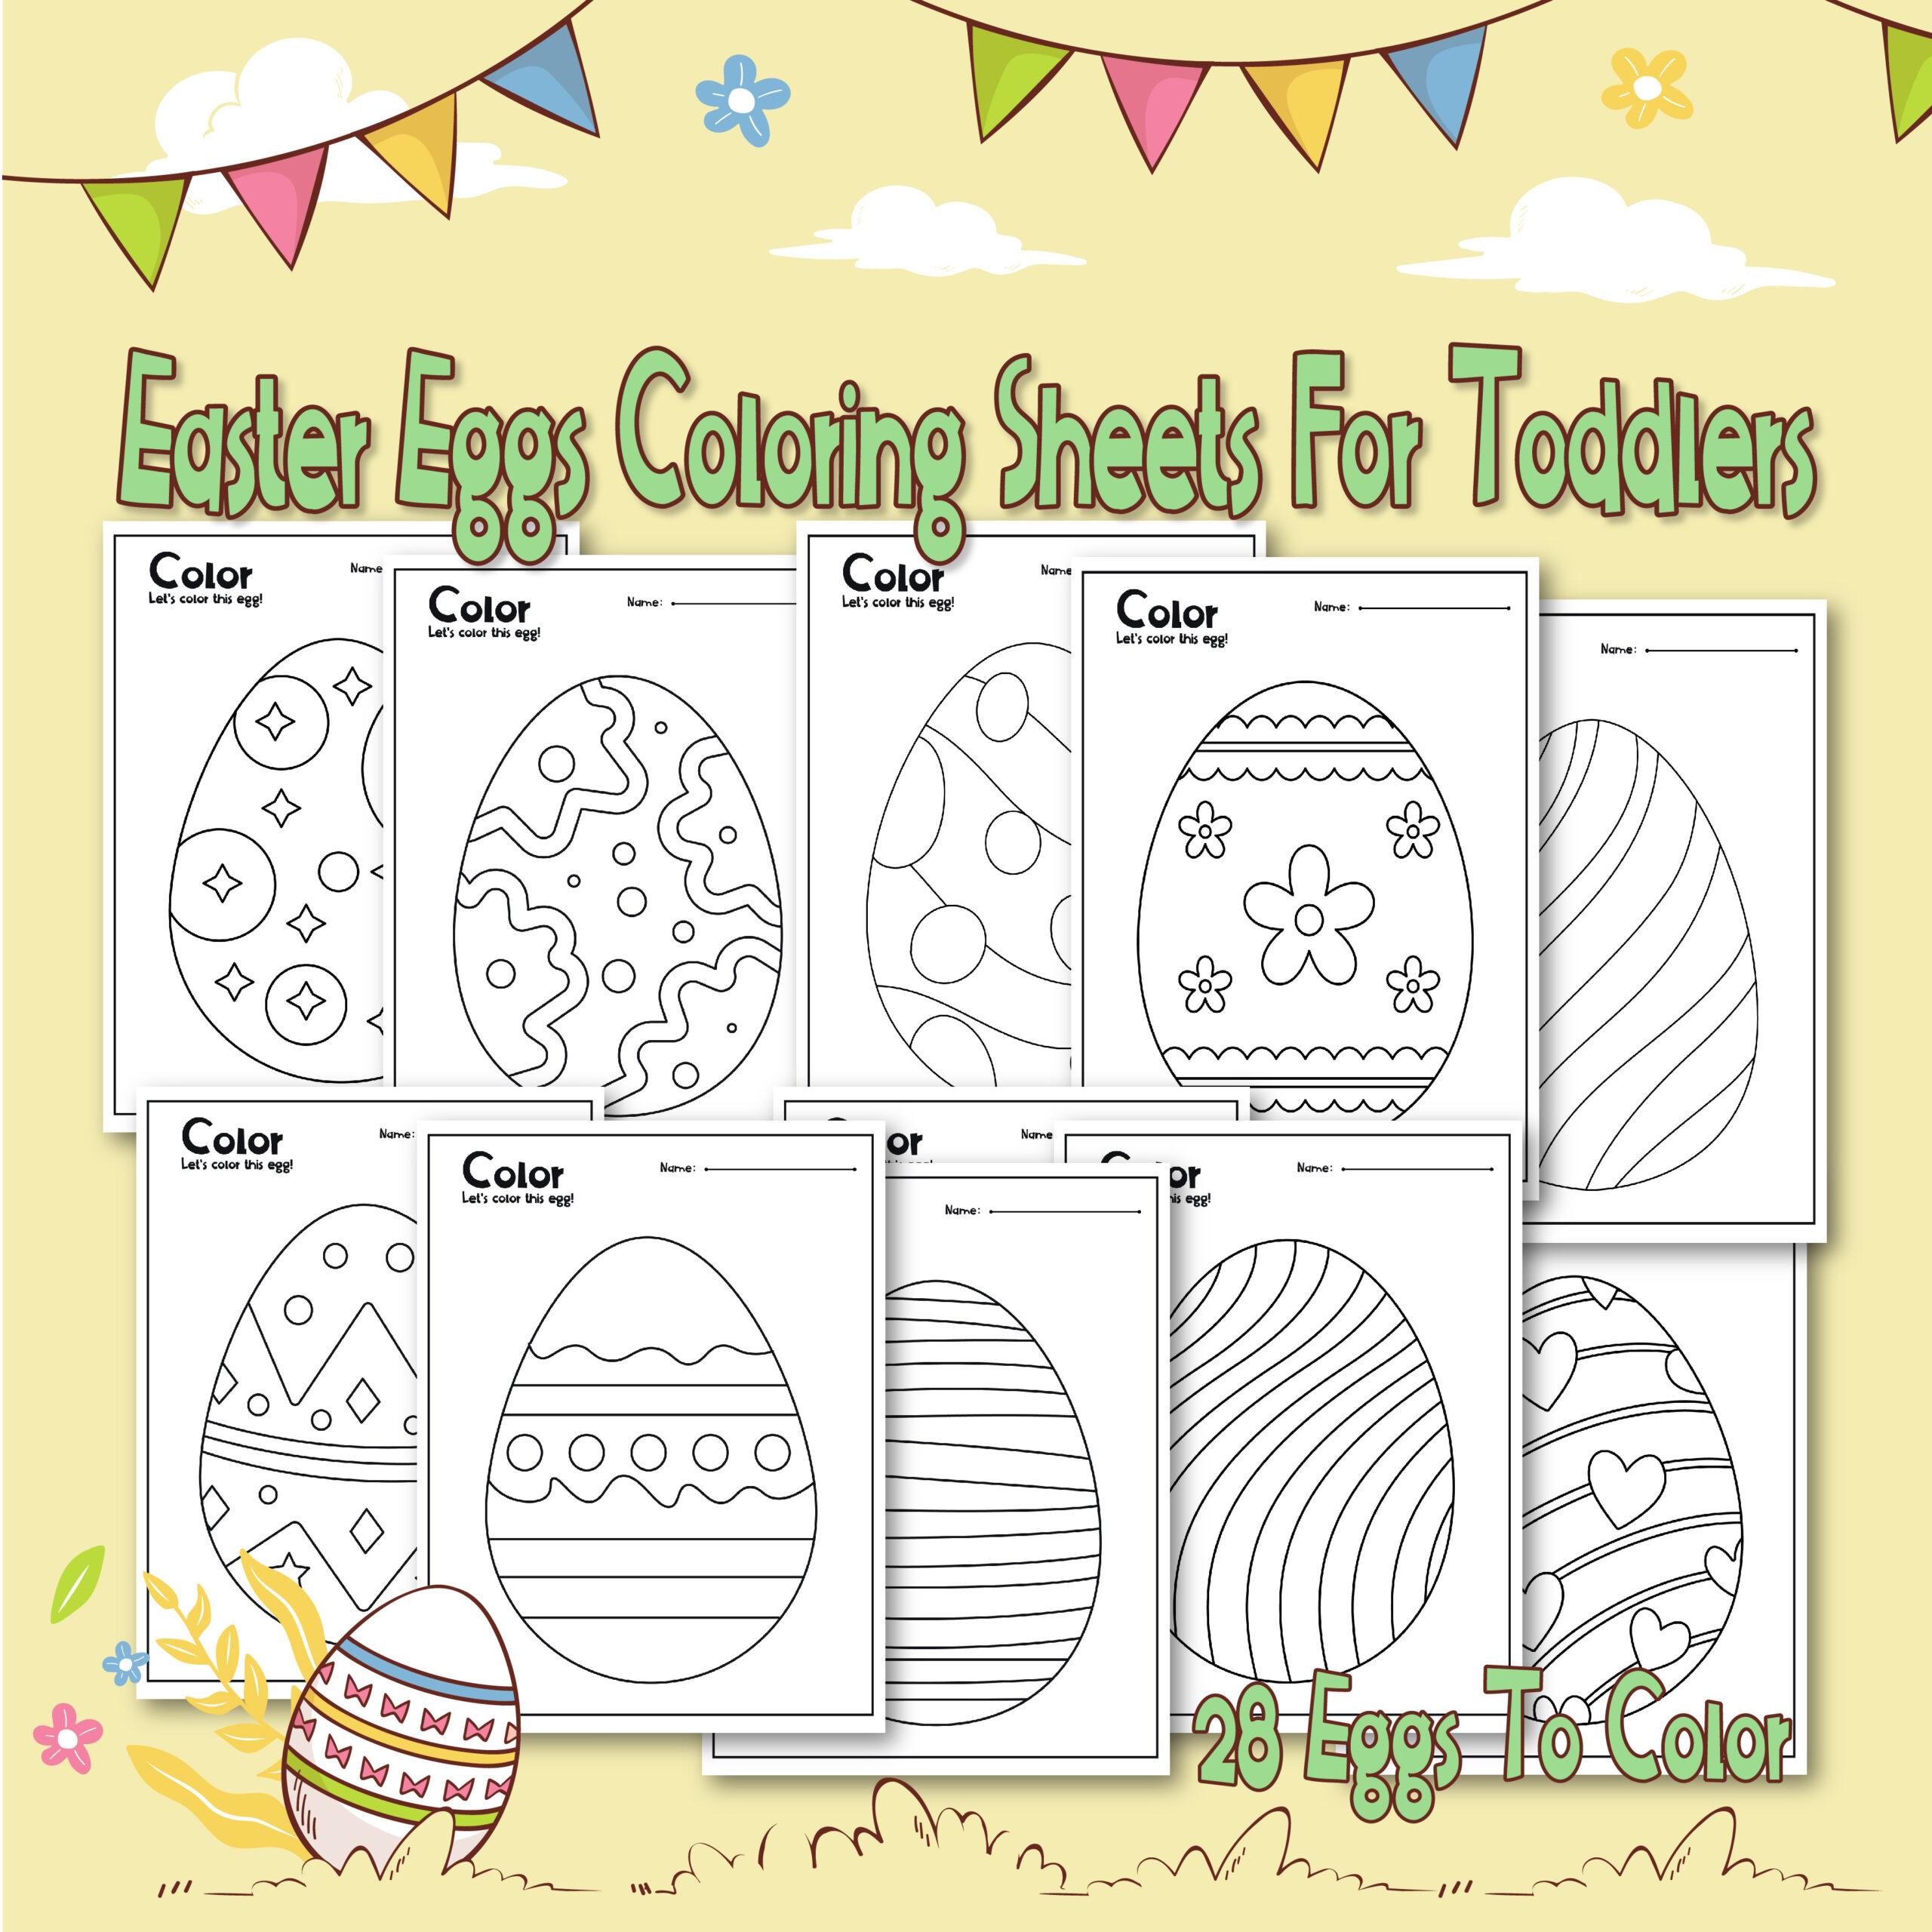 Easter eggs coloring pages made by teachers